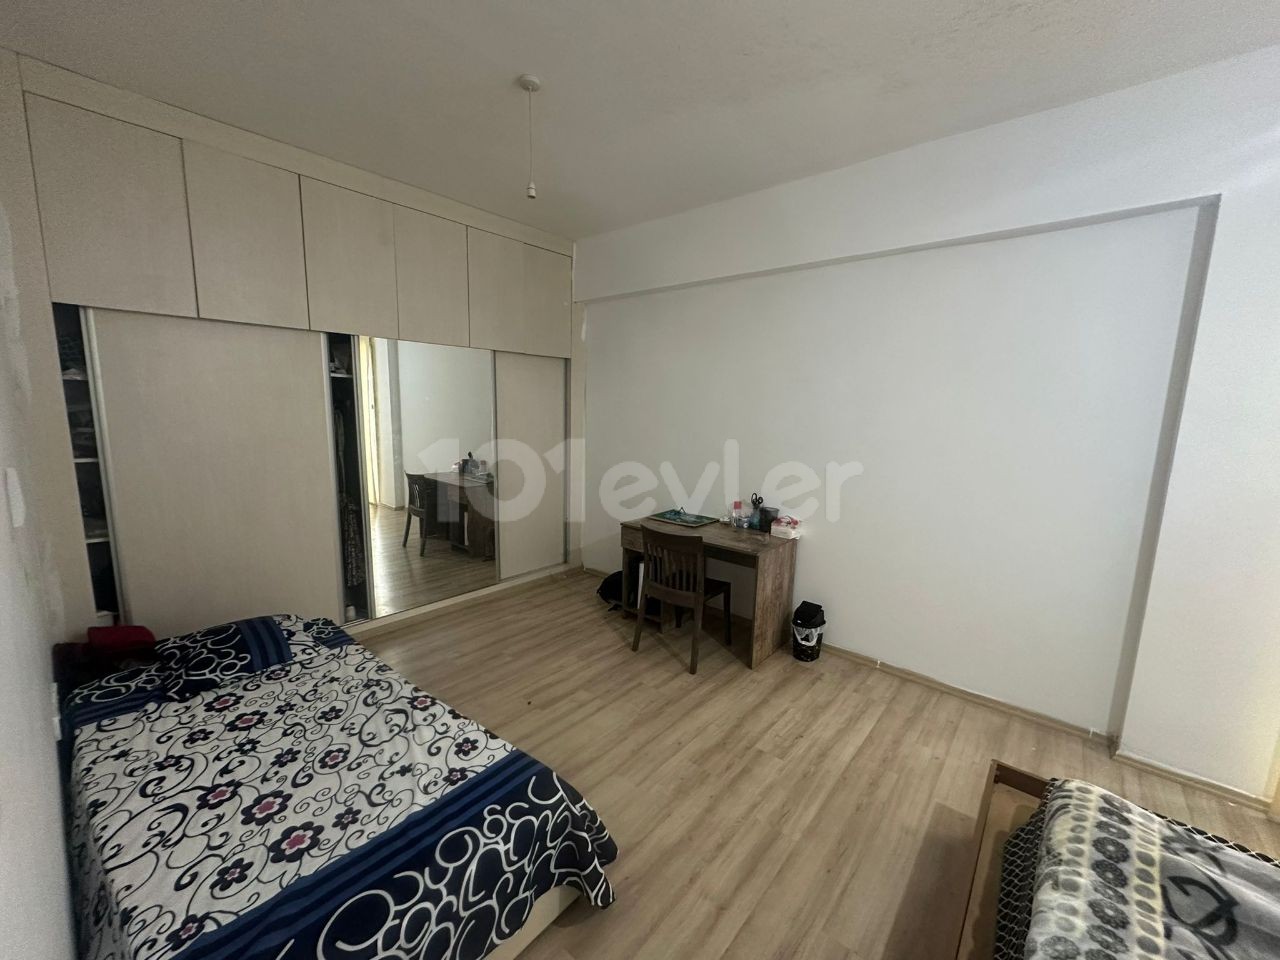 HAMİTKÖY CADDE 3+1 FLAT FOR SALE BEHIND THE KITCHEN